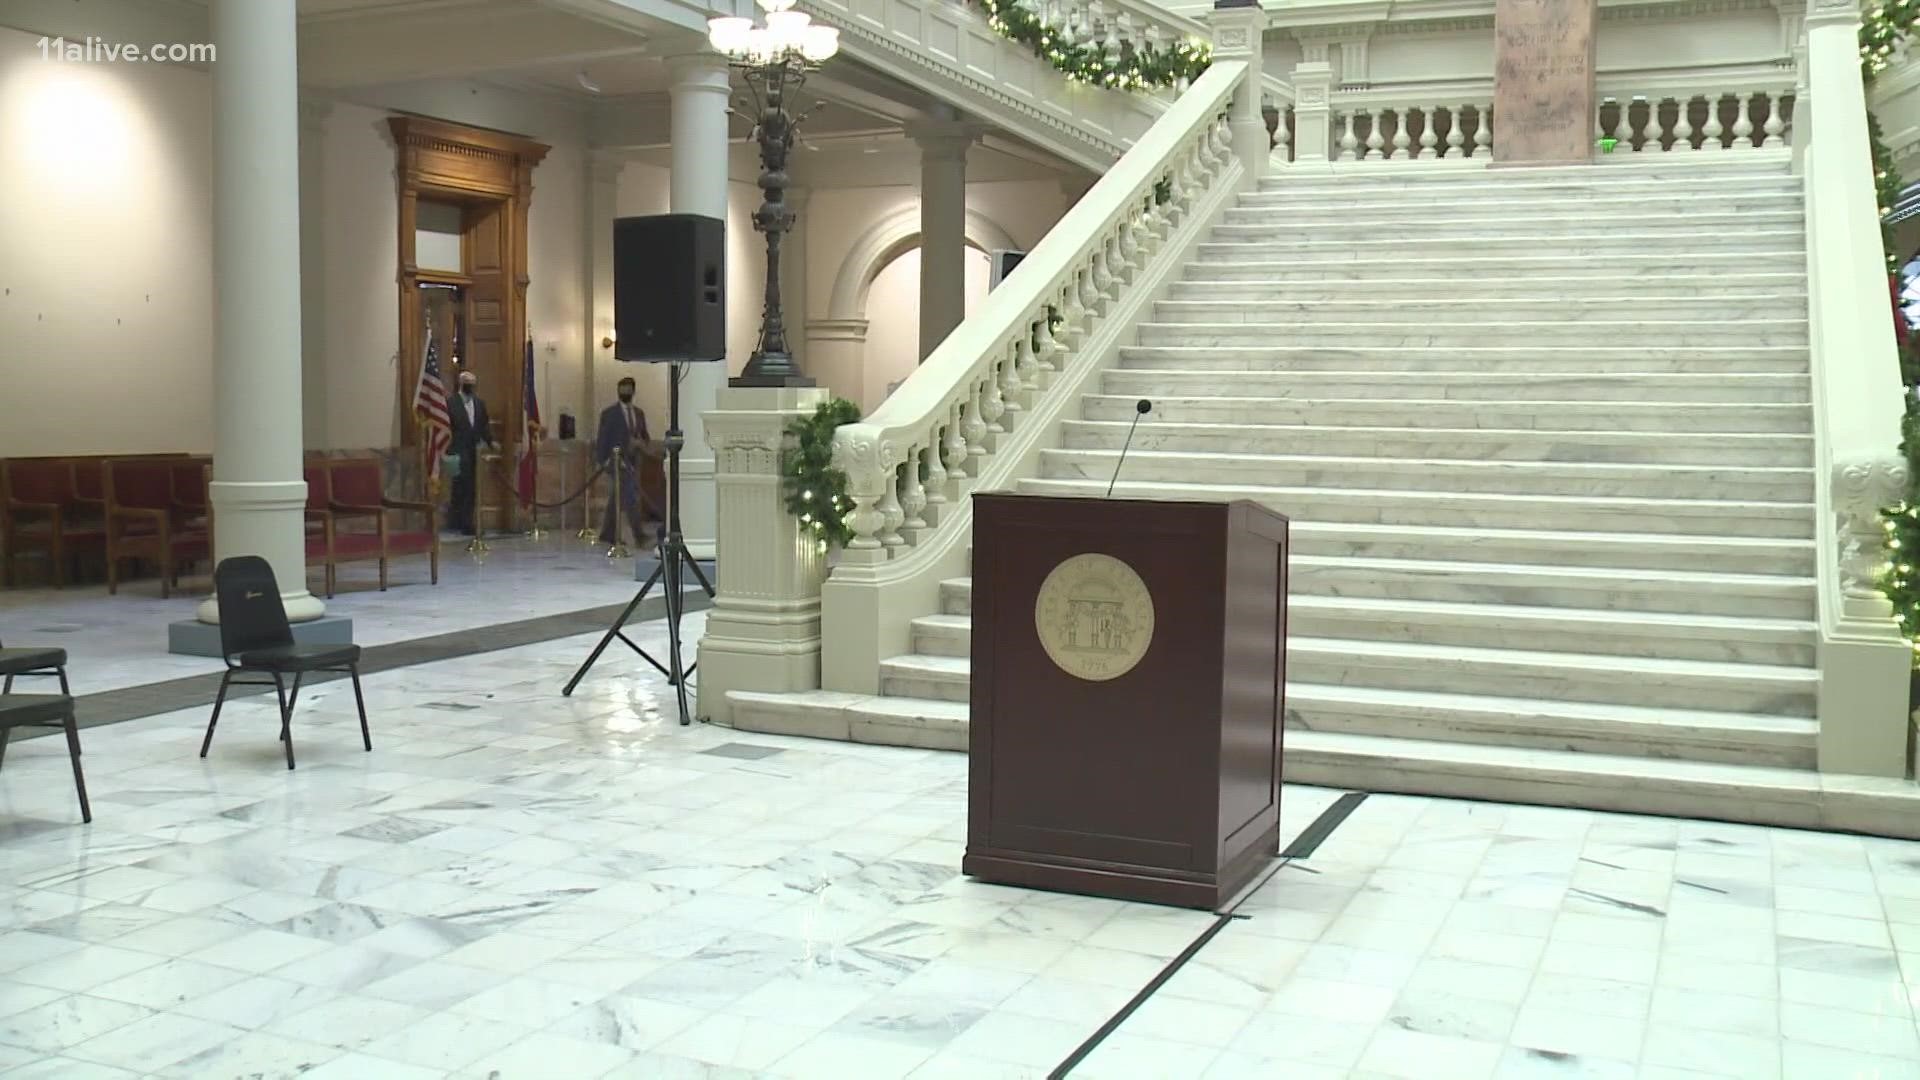 Gov. Kemp and the GBI made the announcement early Tuesday morning.